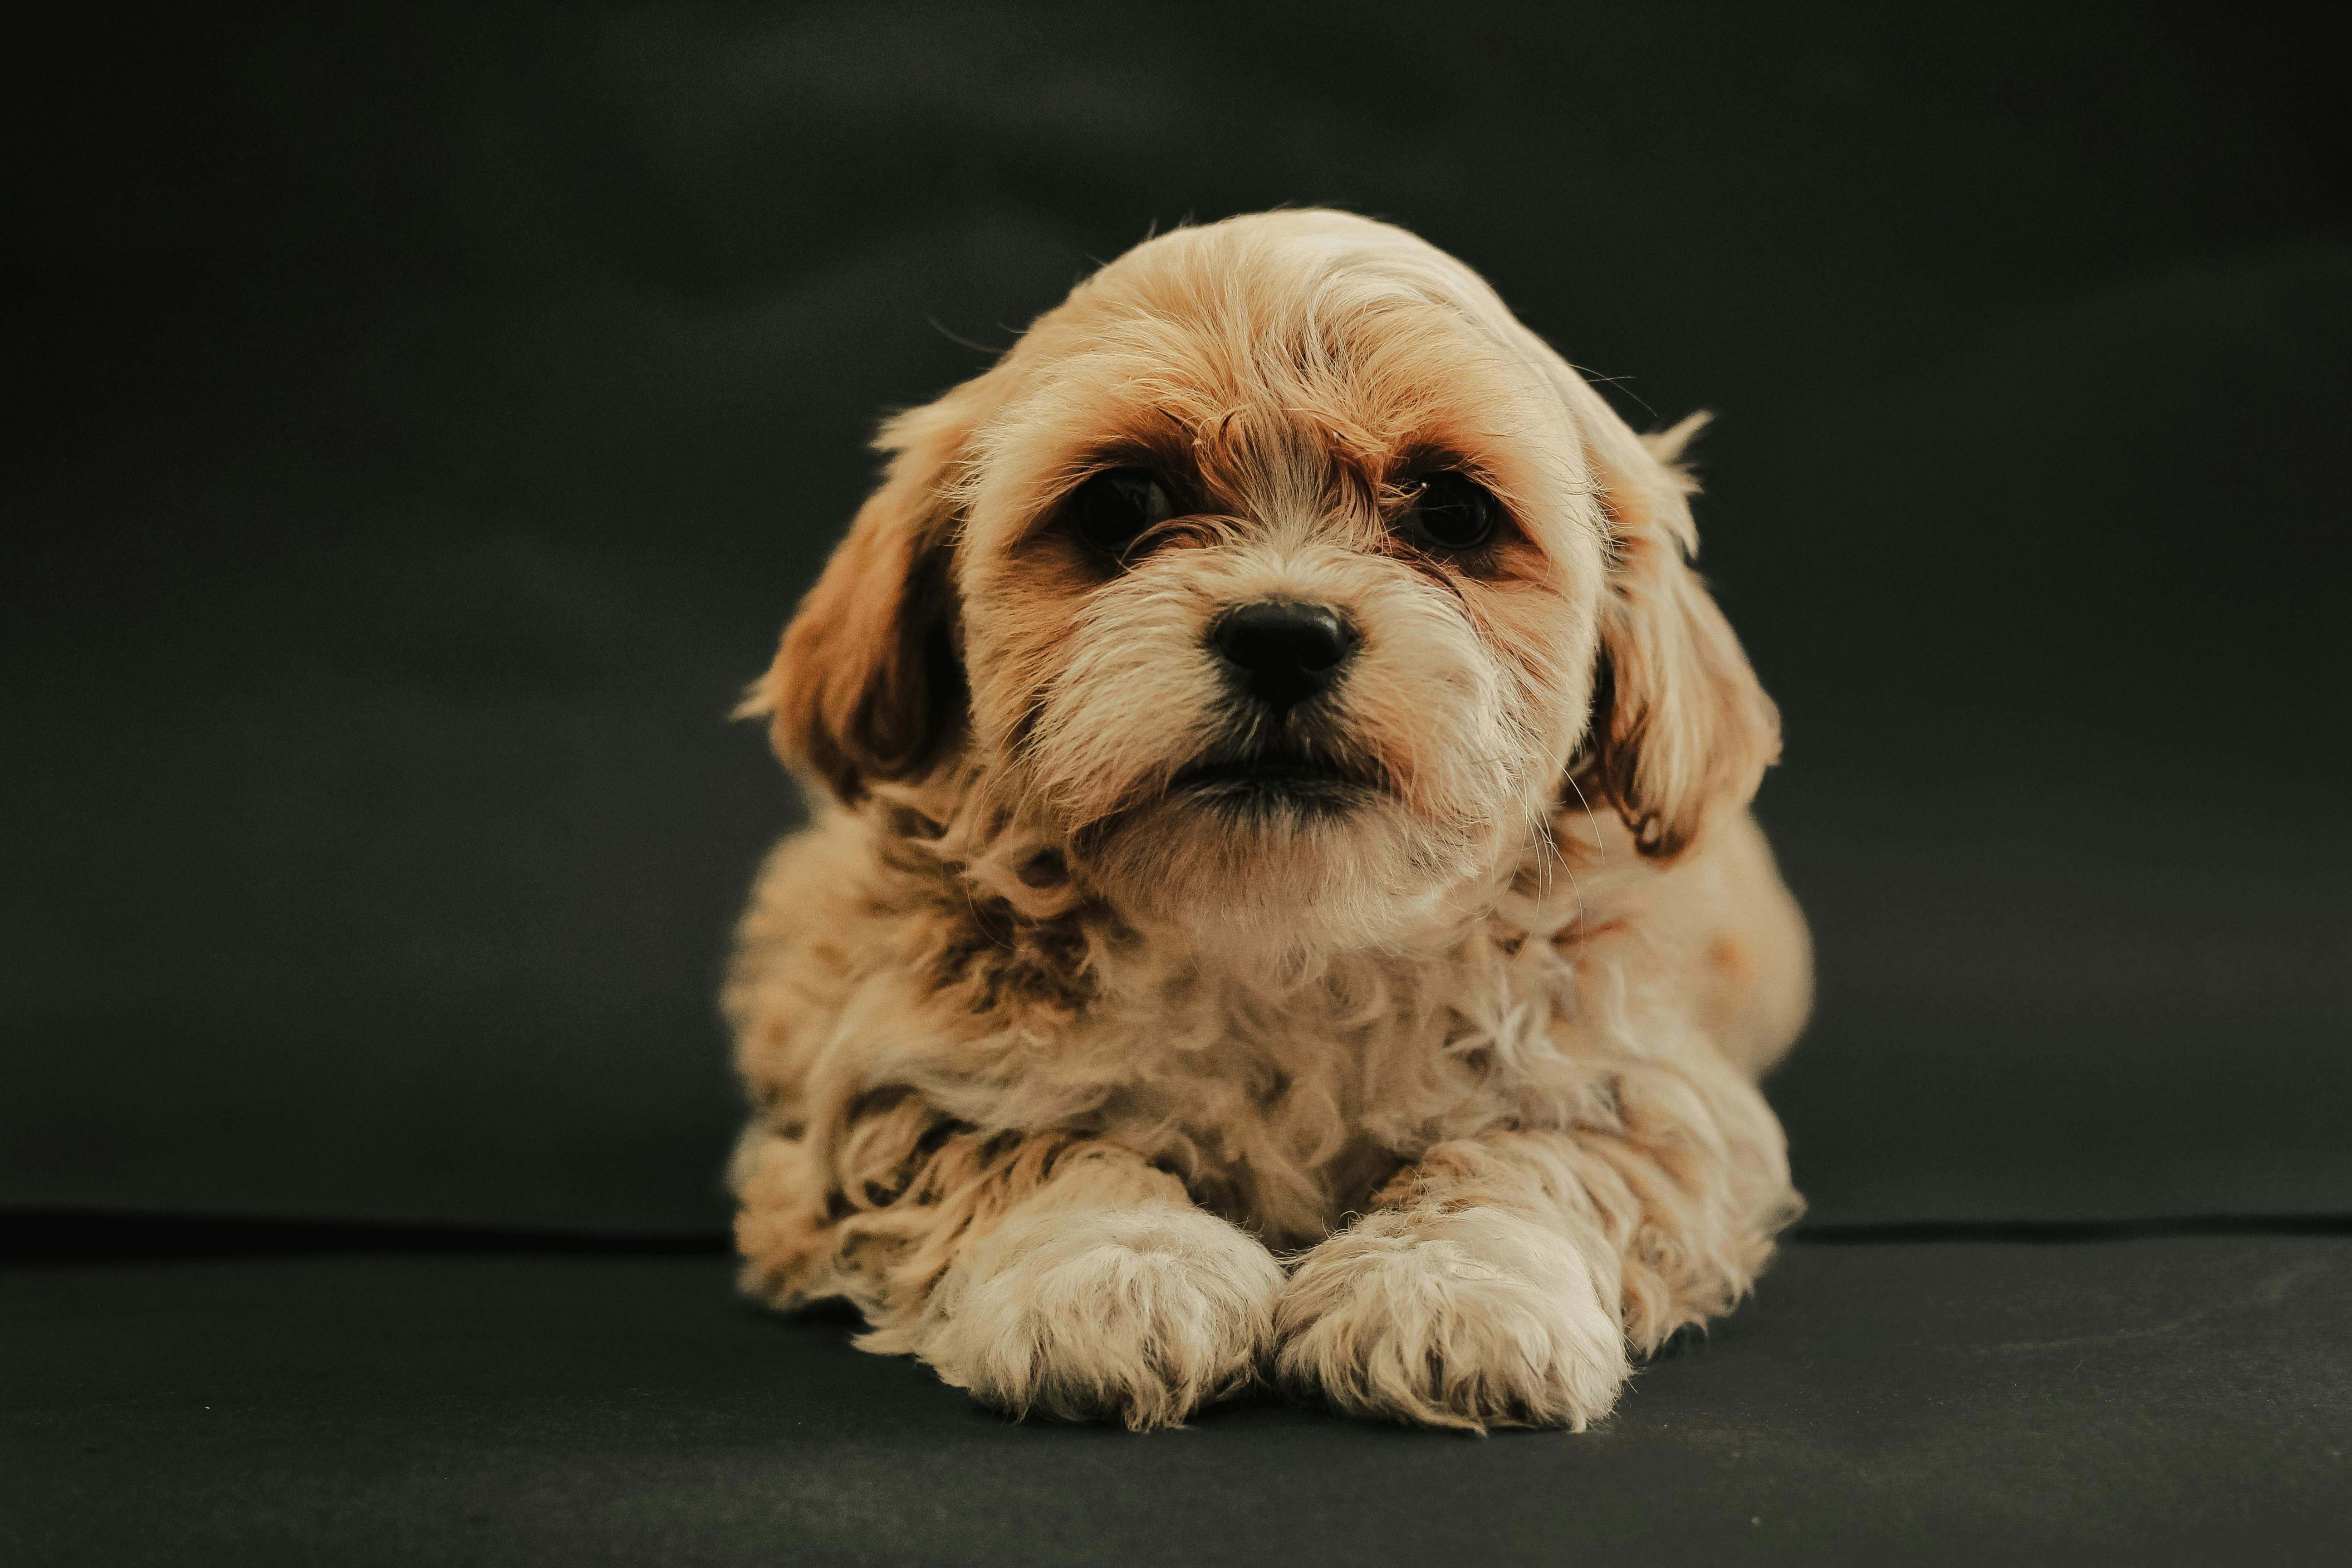 Free Images : puppy, cute, pet, vertebrate, paws, tired, dog breed, lhasa  apso, small dog, knuffig, shih tzu, dog look, purry, havanese, dog like  mammal, dog crossbreeds, cavachon, chinese imperial dog 3600x2400 - -